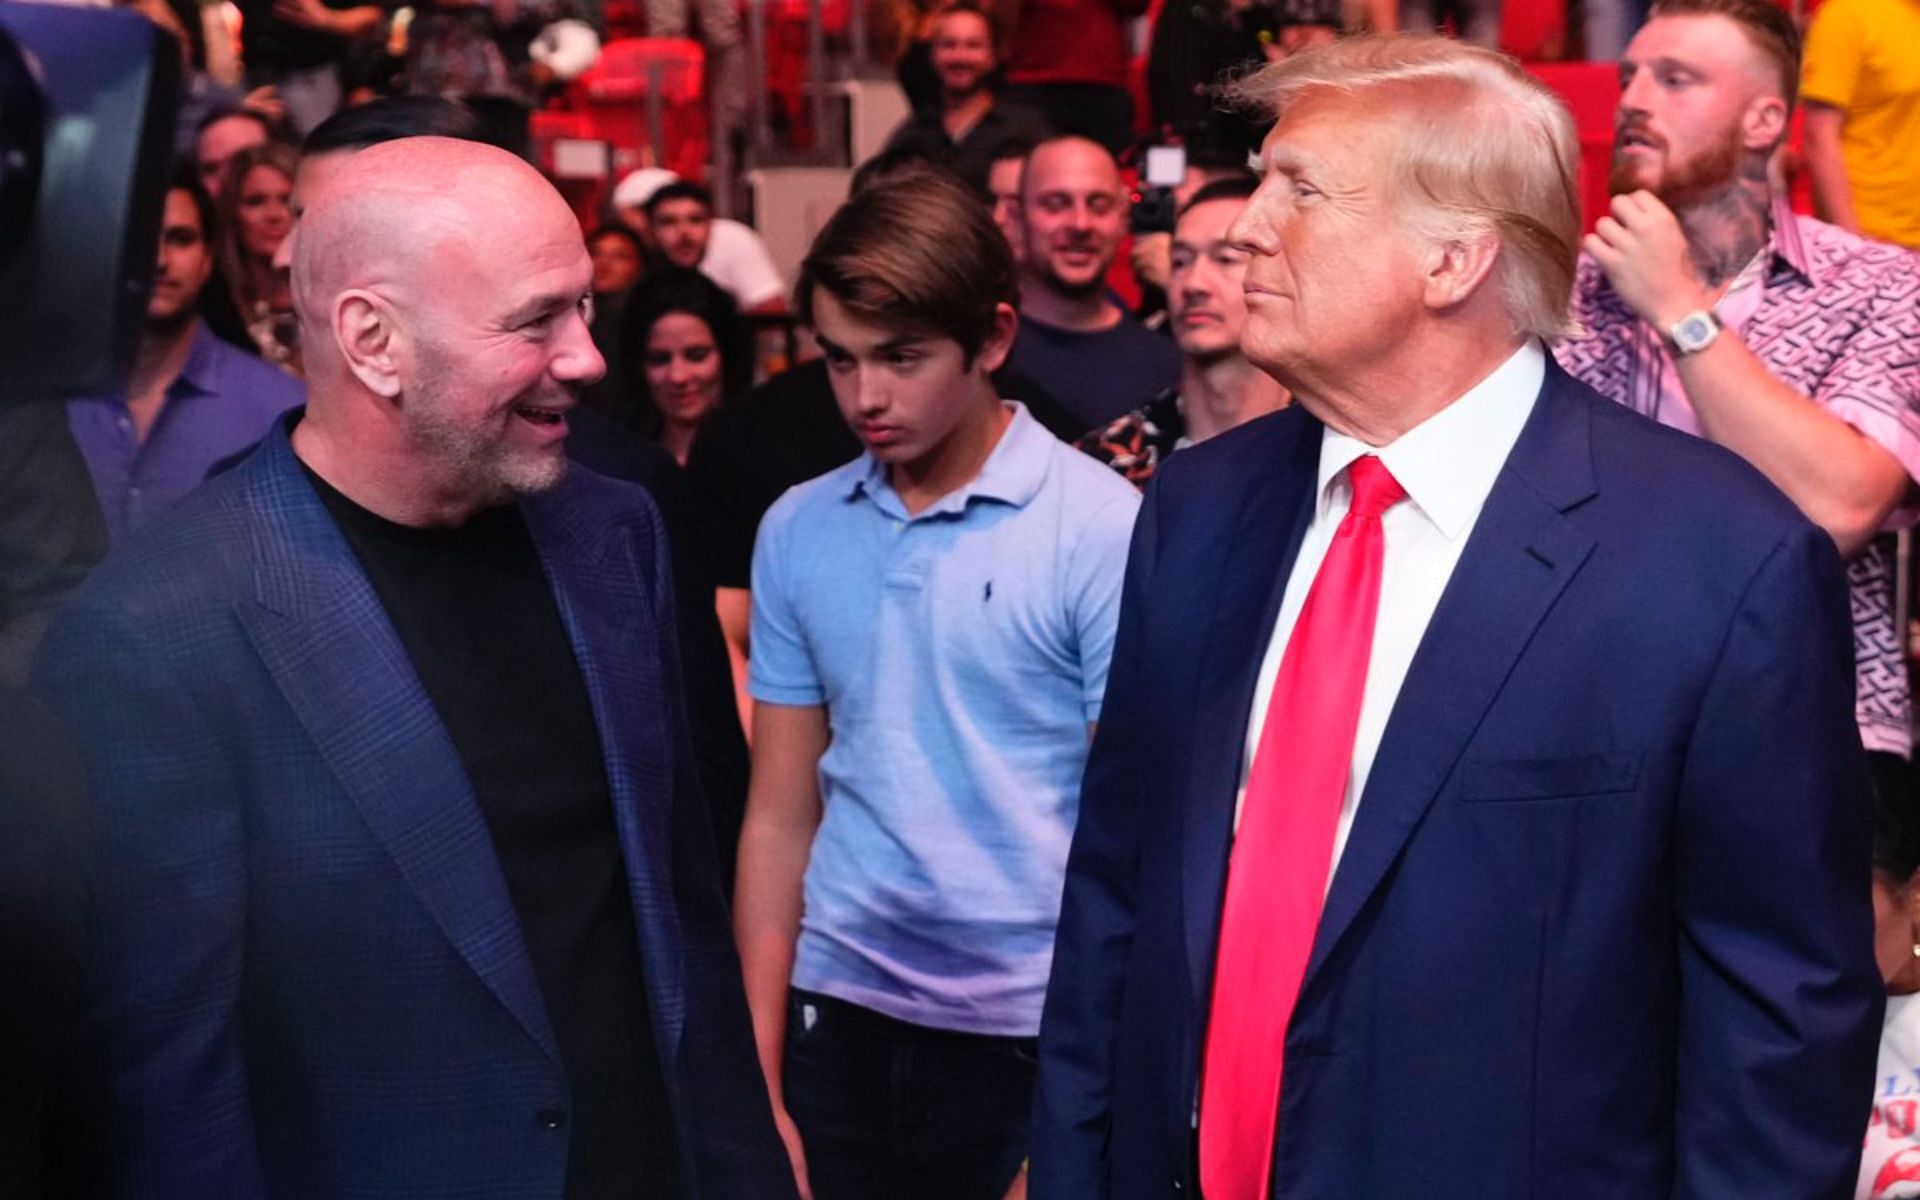 Dana White (left) and Donald Trump (right) [Image credits: @MMAMania on Twitter]